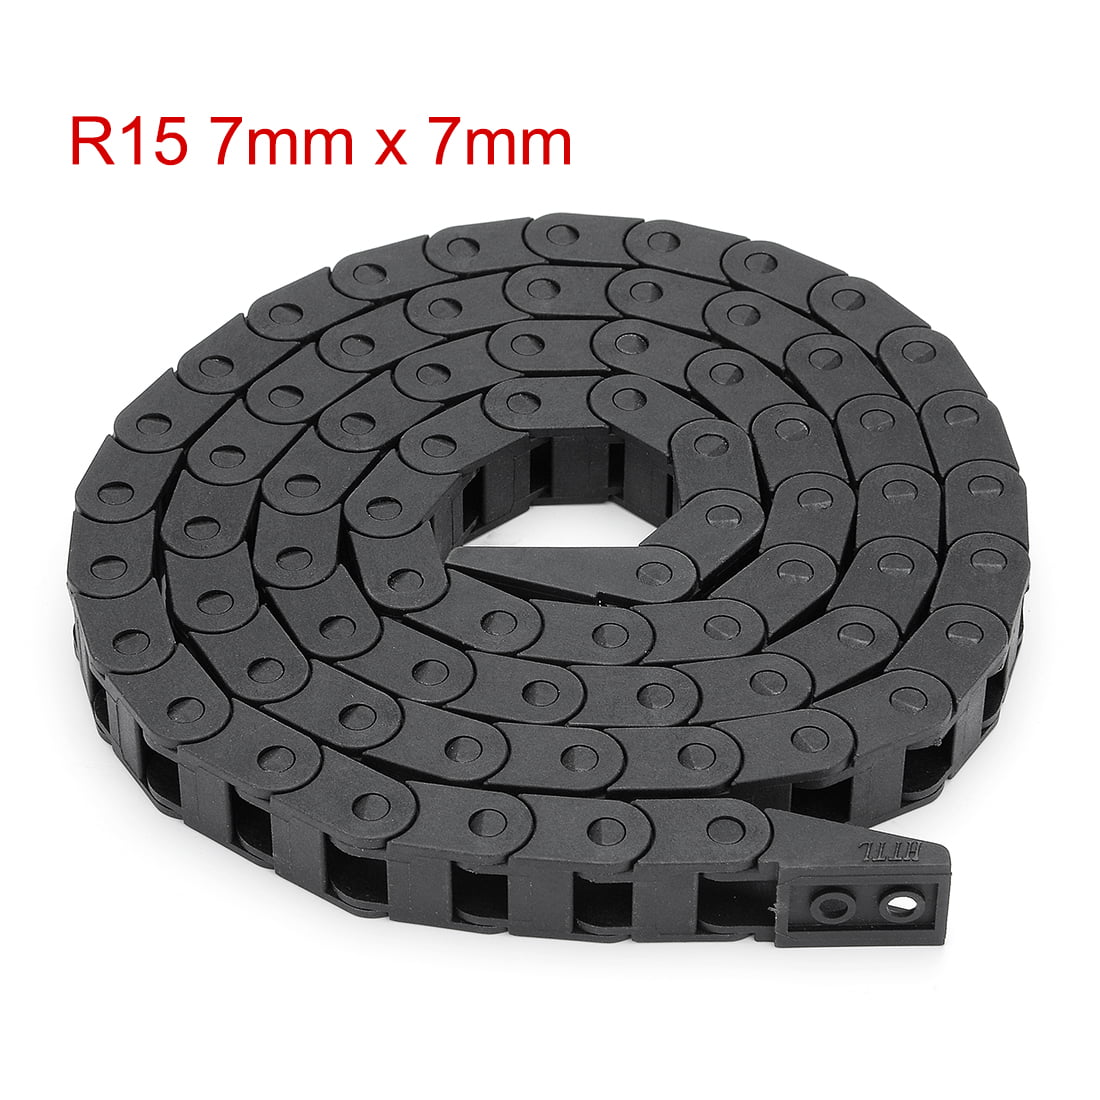 Drag Chain Black Nylon 1m Length Cable Wire Carrier Drag Chain Engraving Machine Accessory high Elasticity and Abrasion Resistance 15mm x 30mm